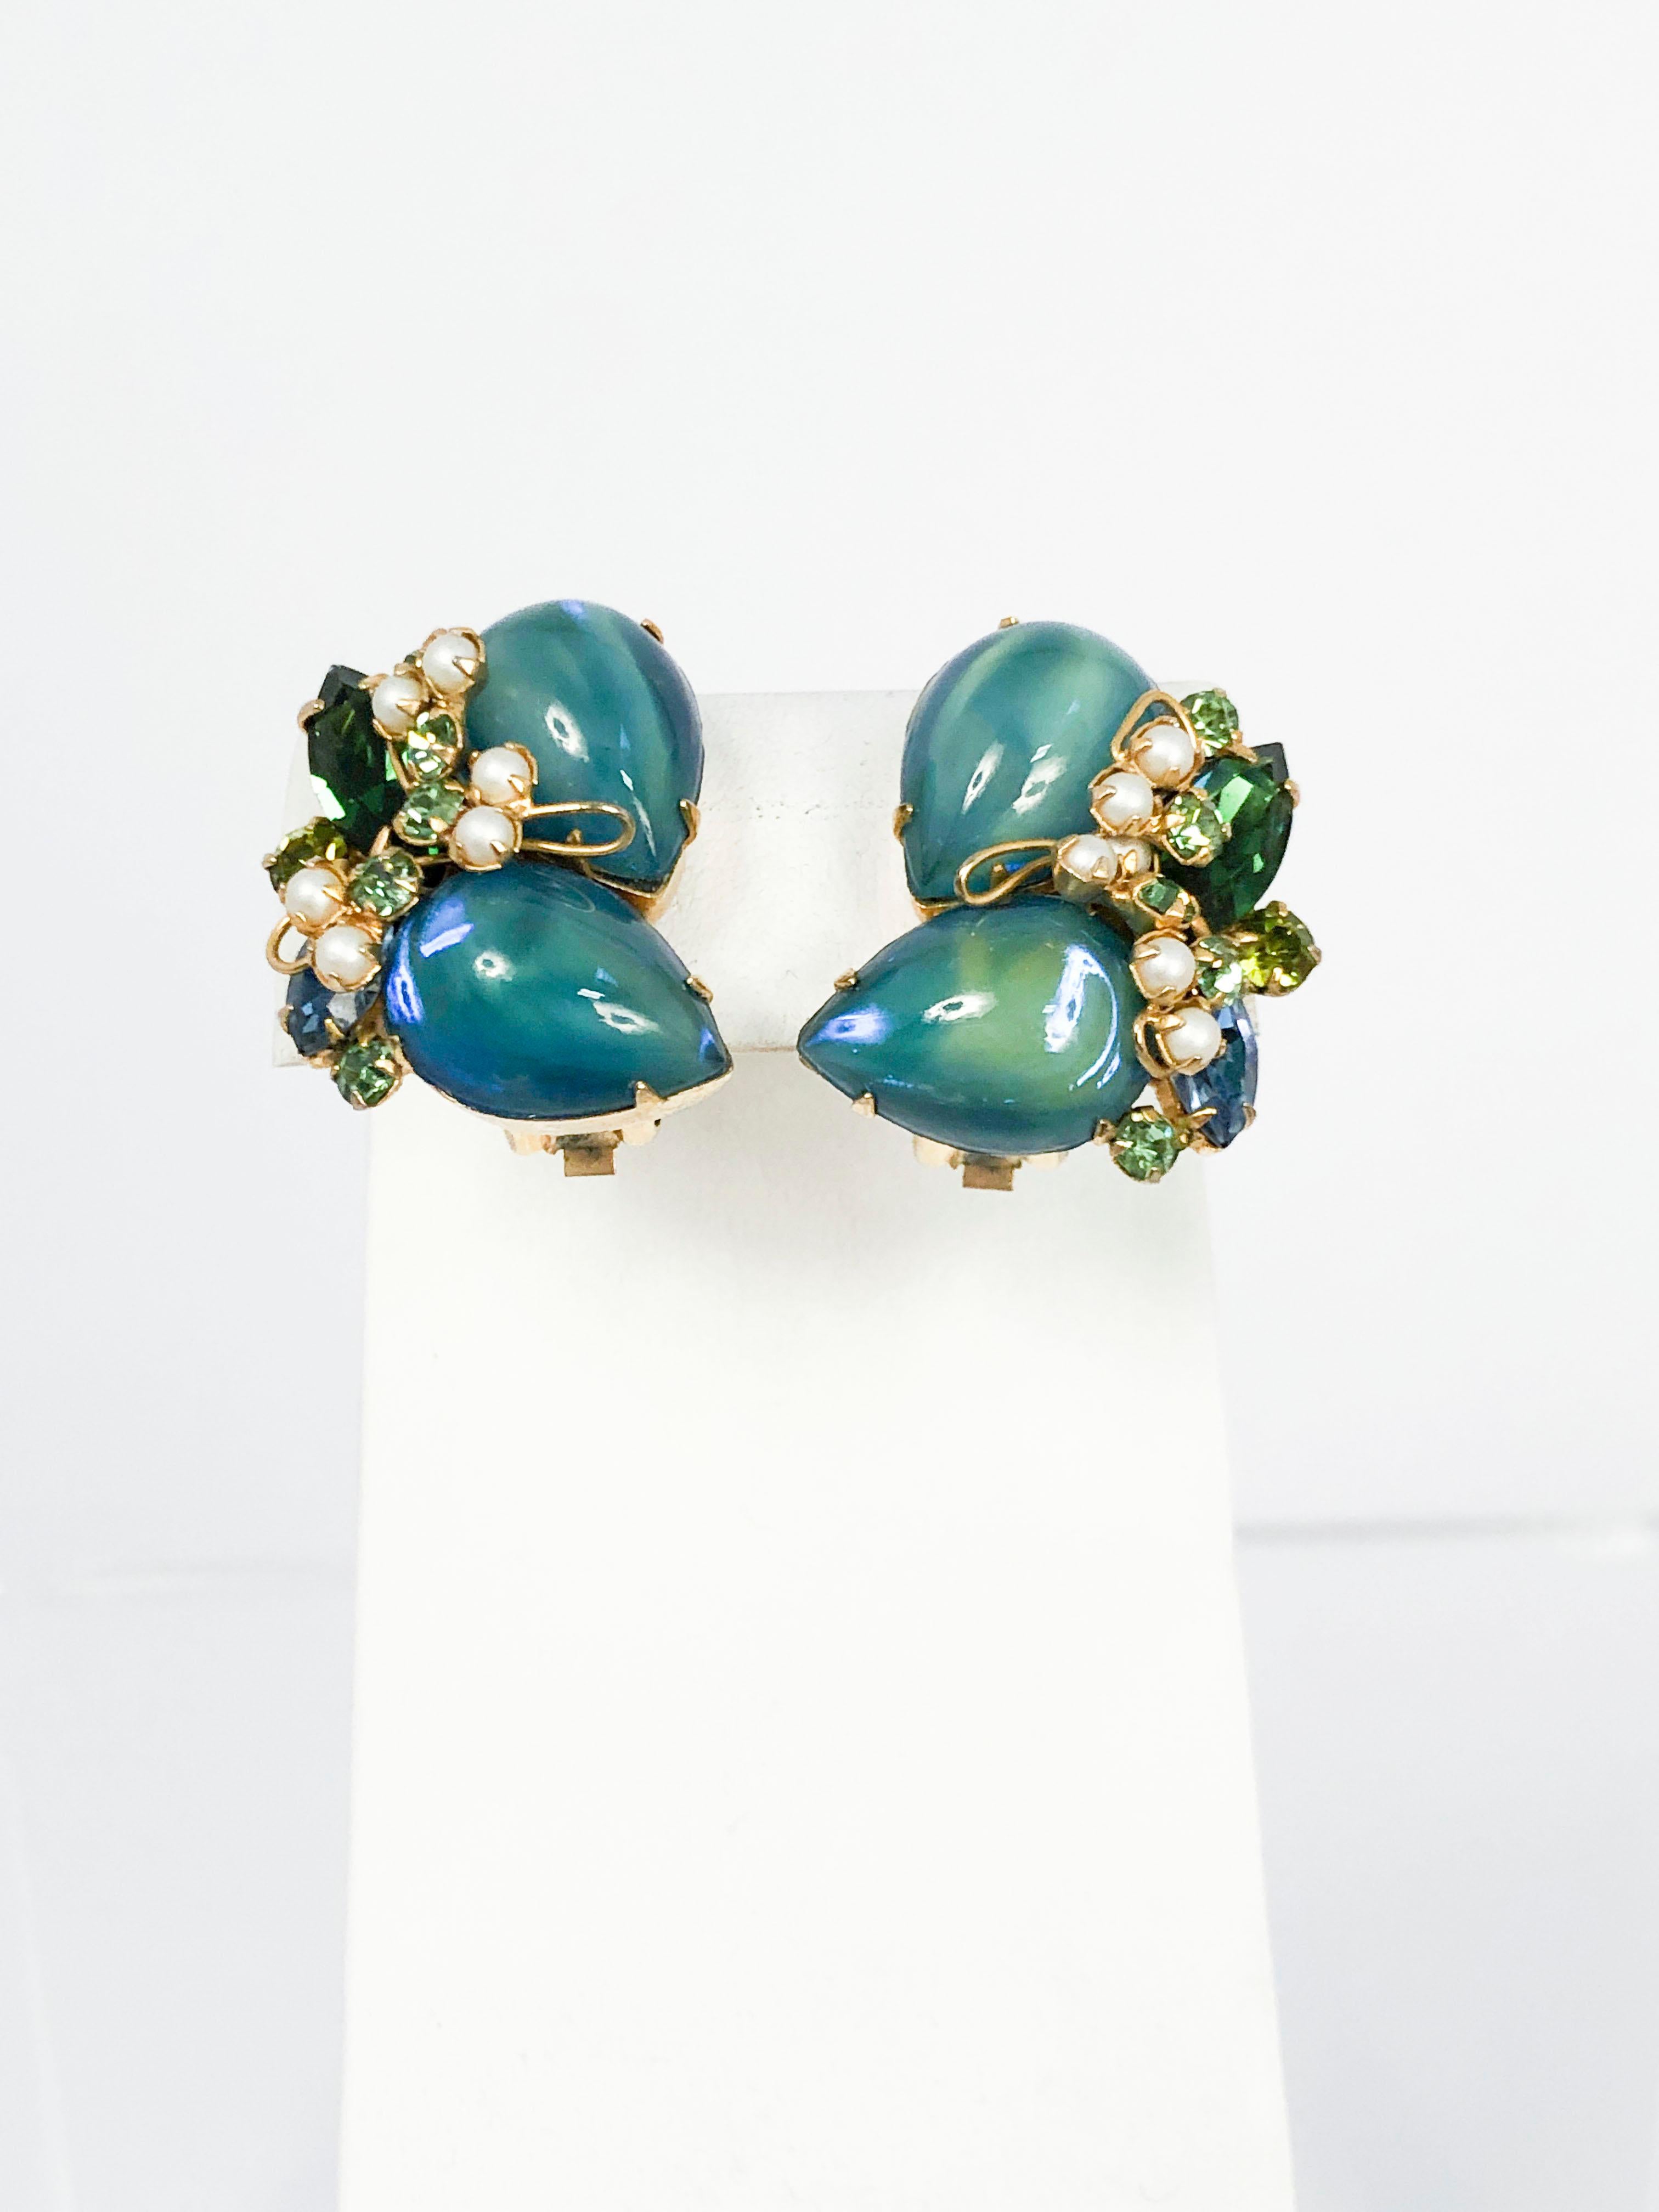 1960s Alice Coveniess Blue/Green Clip-on Earrings with multi-medium stones, fastenings, and faux pearls on gold plate.